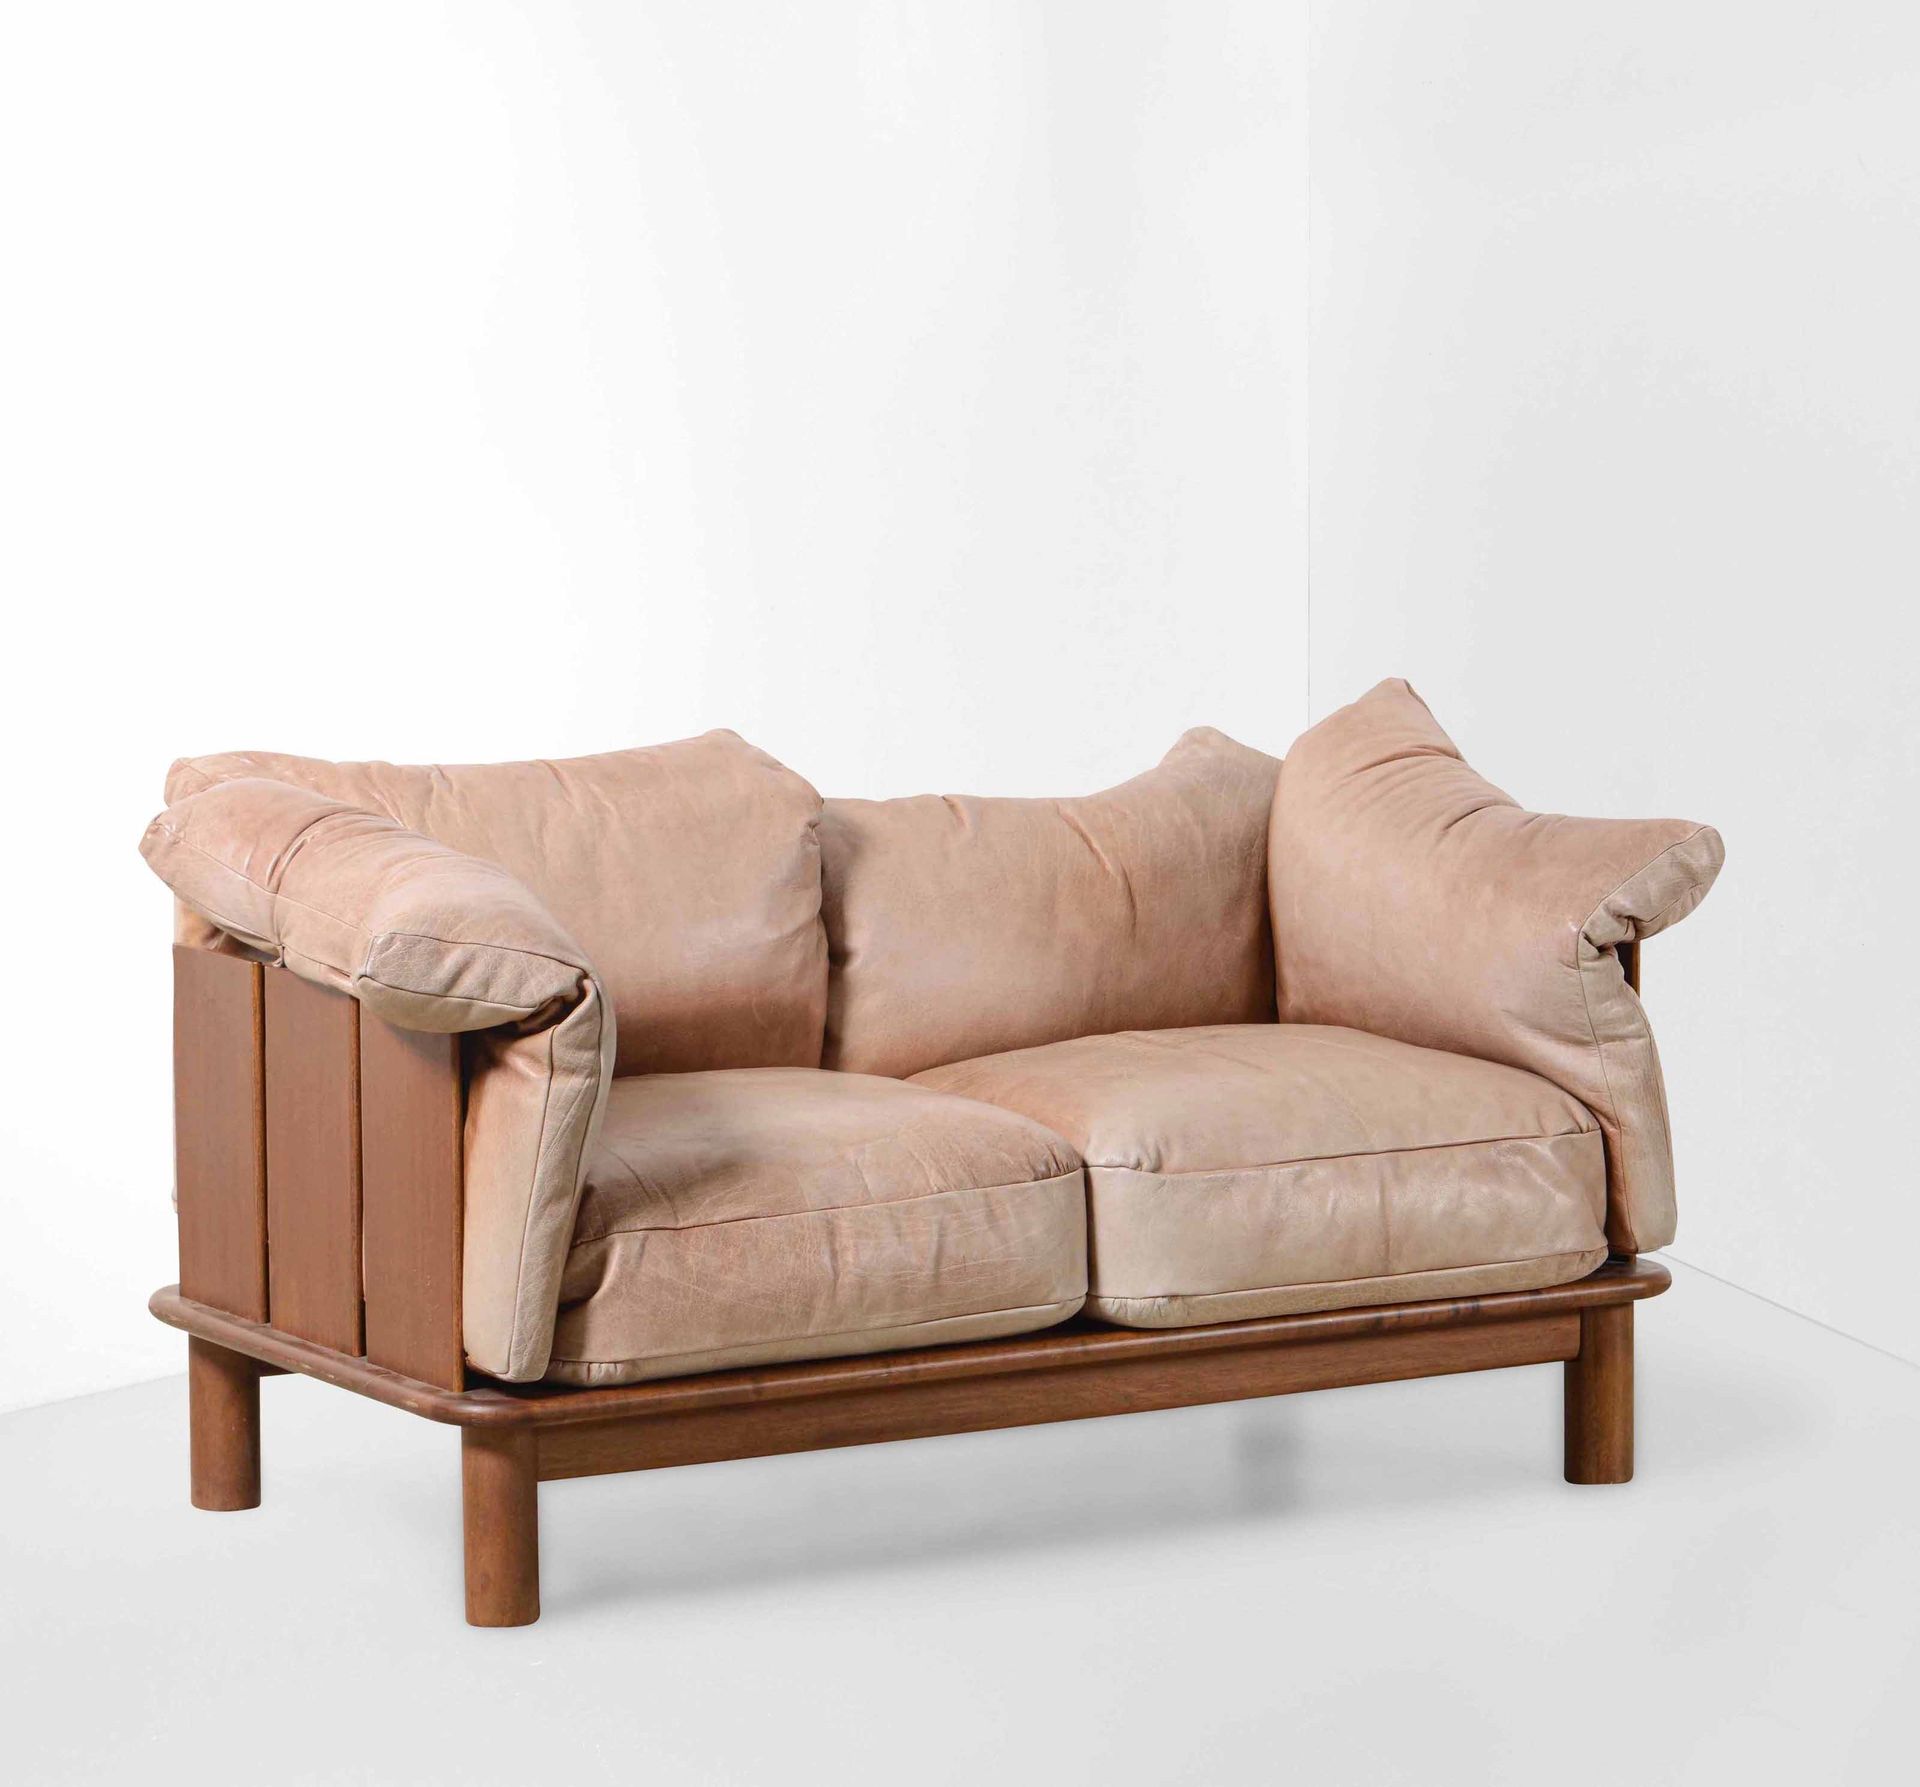 De Pas d'Urbino Lomazzi Pitti sofa with wooden structure and supports and leathe&hellip;